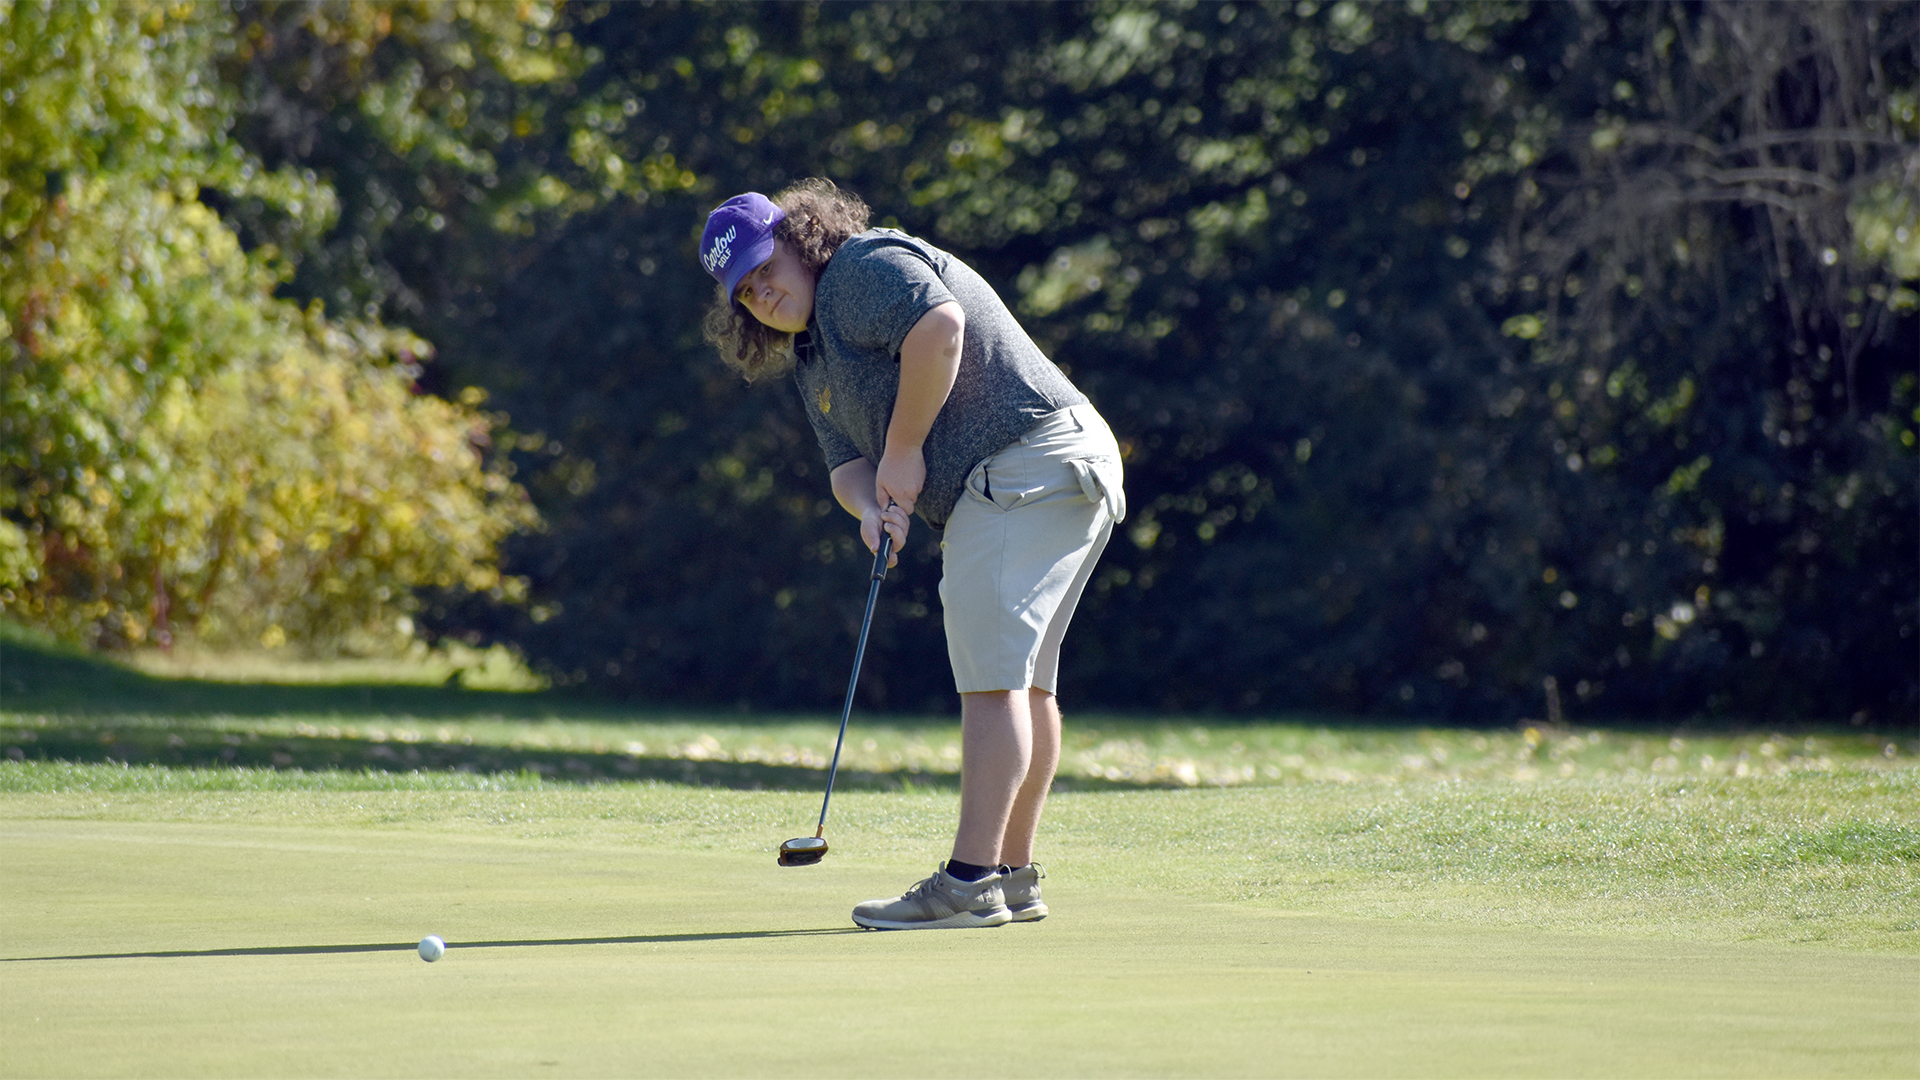 Ryley Stephenson putting at the 2022 USCAA Championship. Archived photo courtesy of the USCAA.